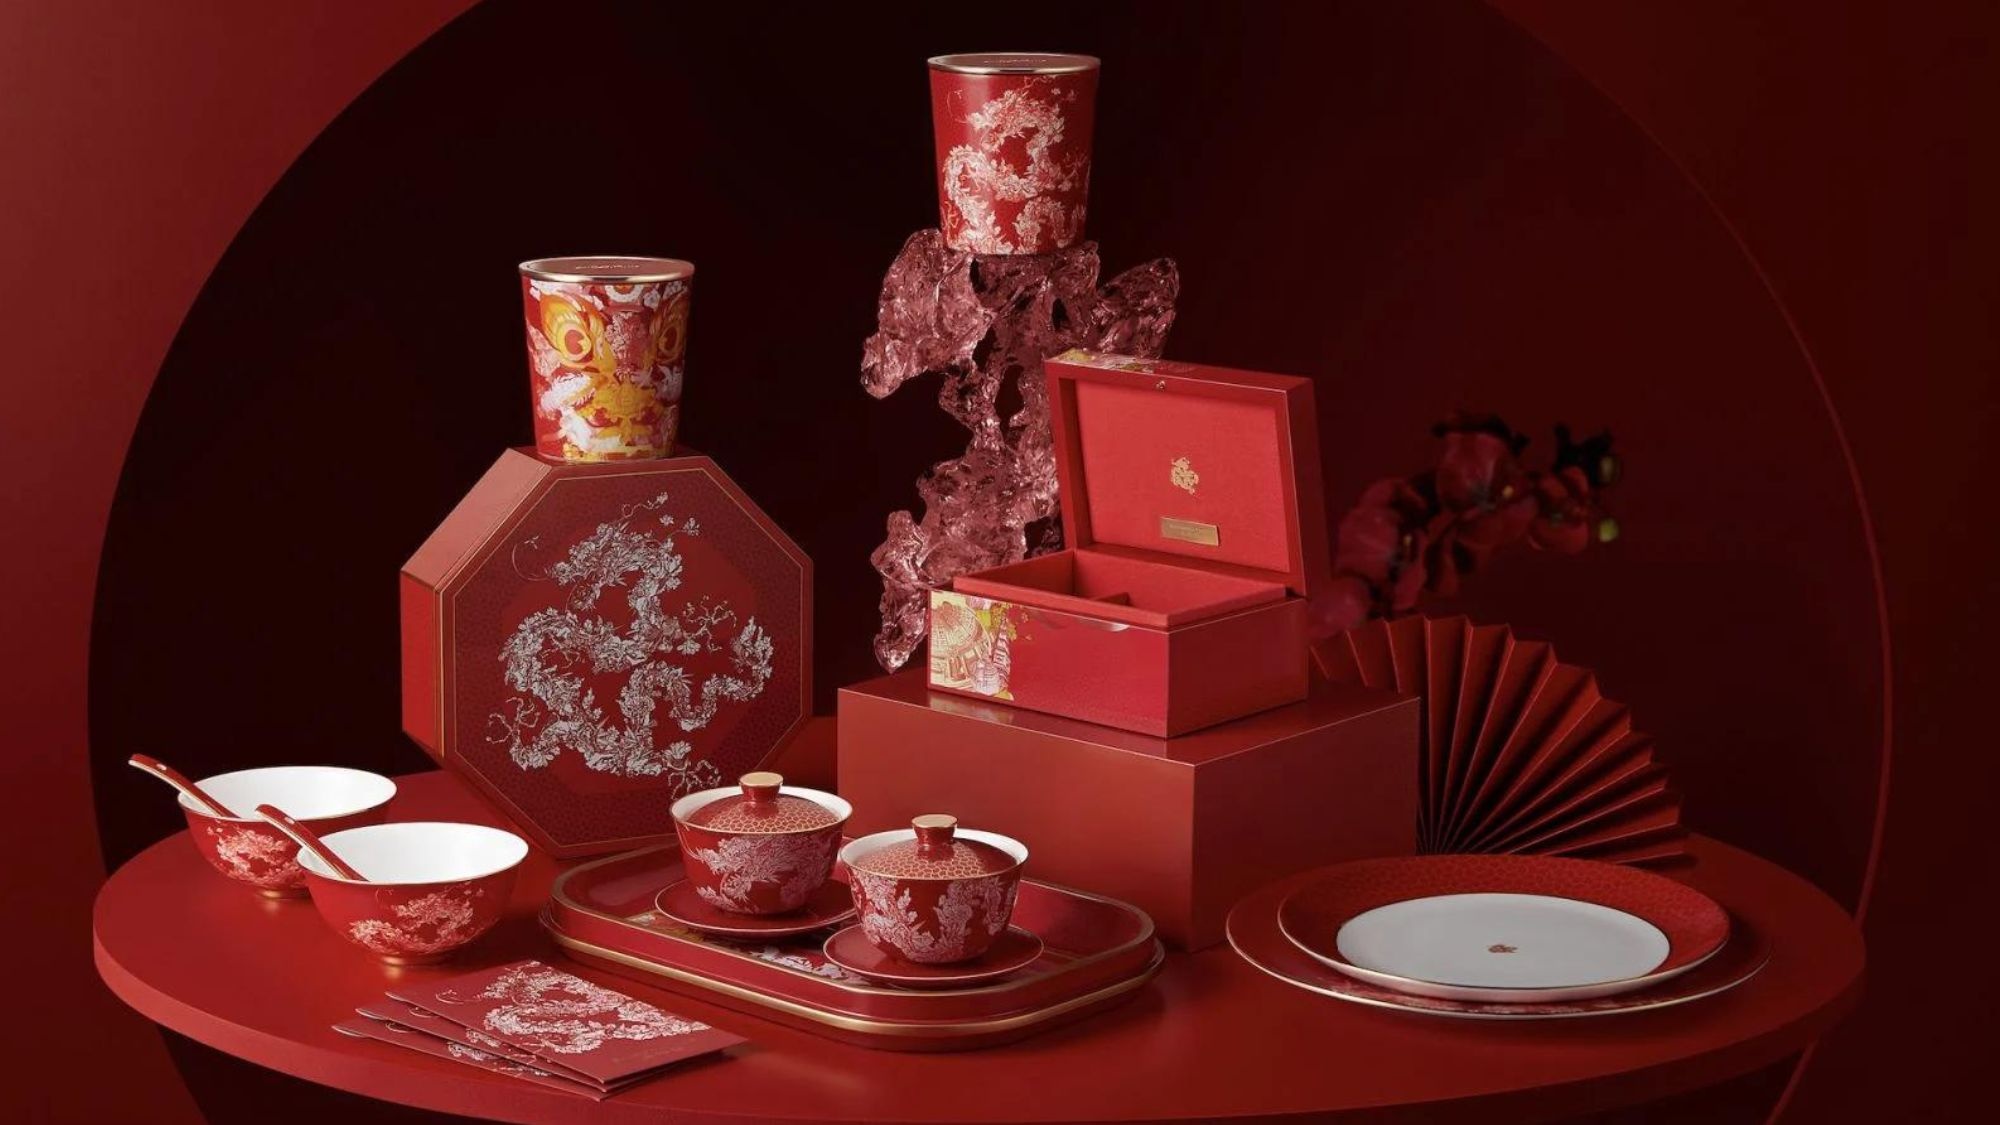 Tsai's artistry fuses Eastern and Western cultures, creating a harmonious celebration of tradition and modernity. Explore the perfect blend of Chinese craftsmanship and contemporary style this Chinese New Year.